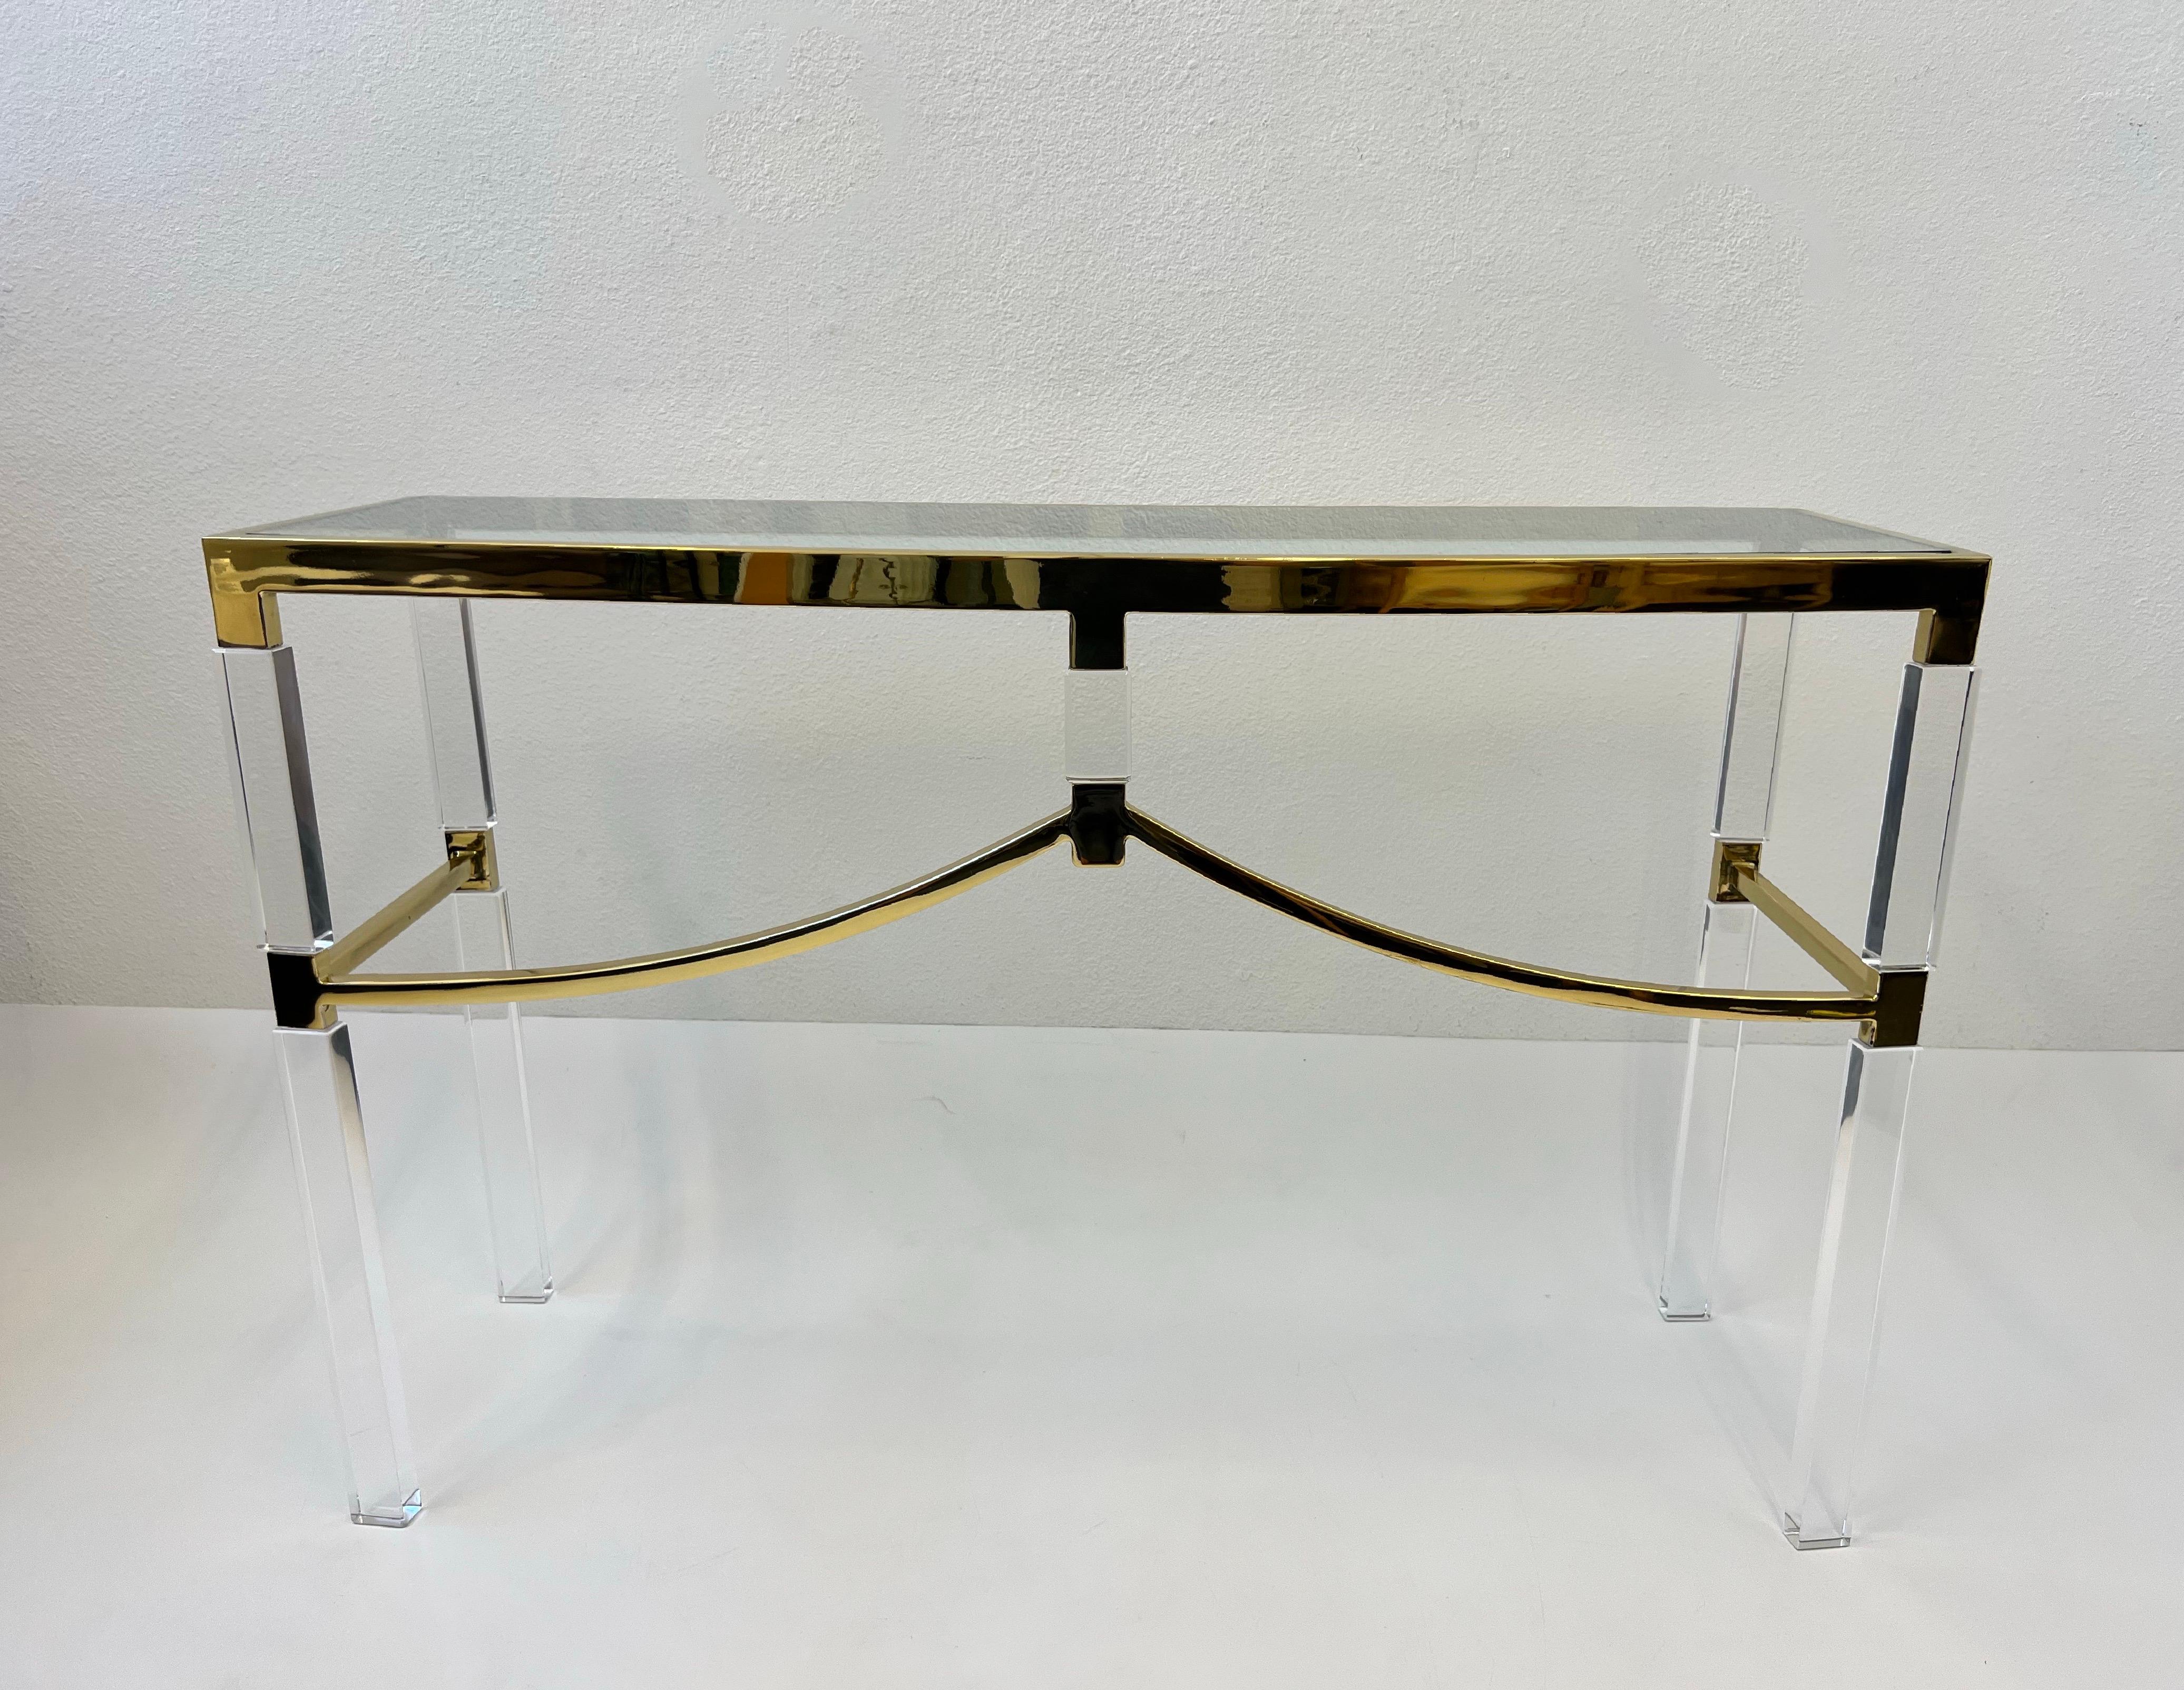 1970s polish brass and clear lucite with a glass top “Regency” console table by renowned American designer Charles Hollis Jones. 
The acrylic has been newly professionally polished, the brass shows minor wear consistent with age. New glass top.